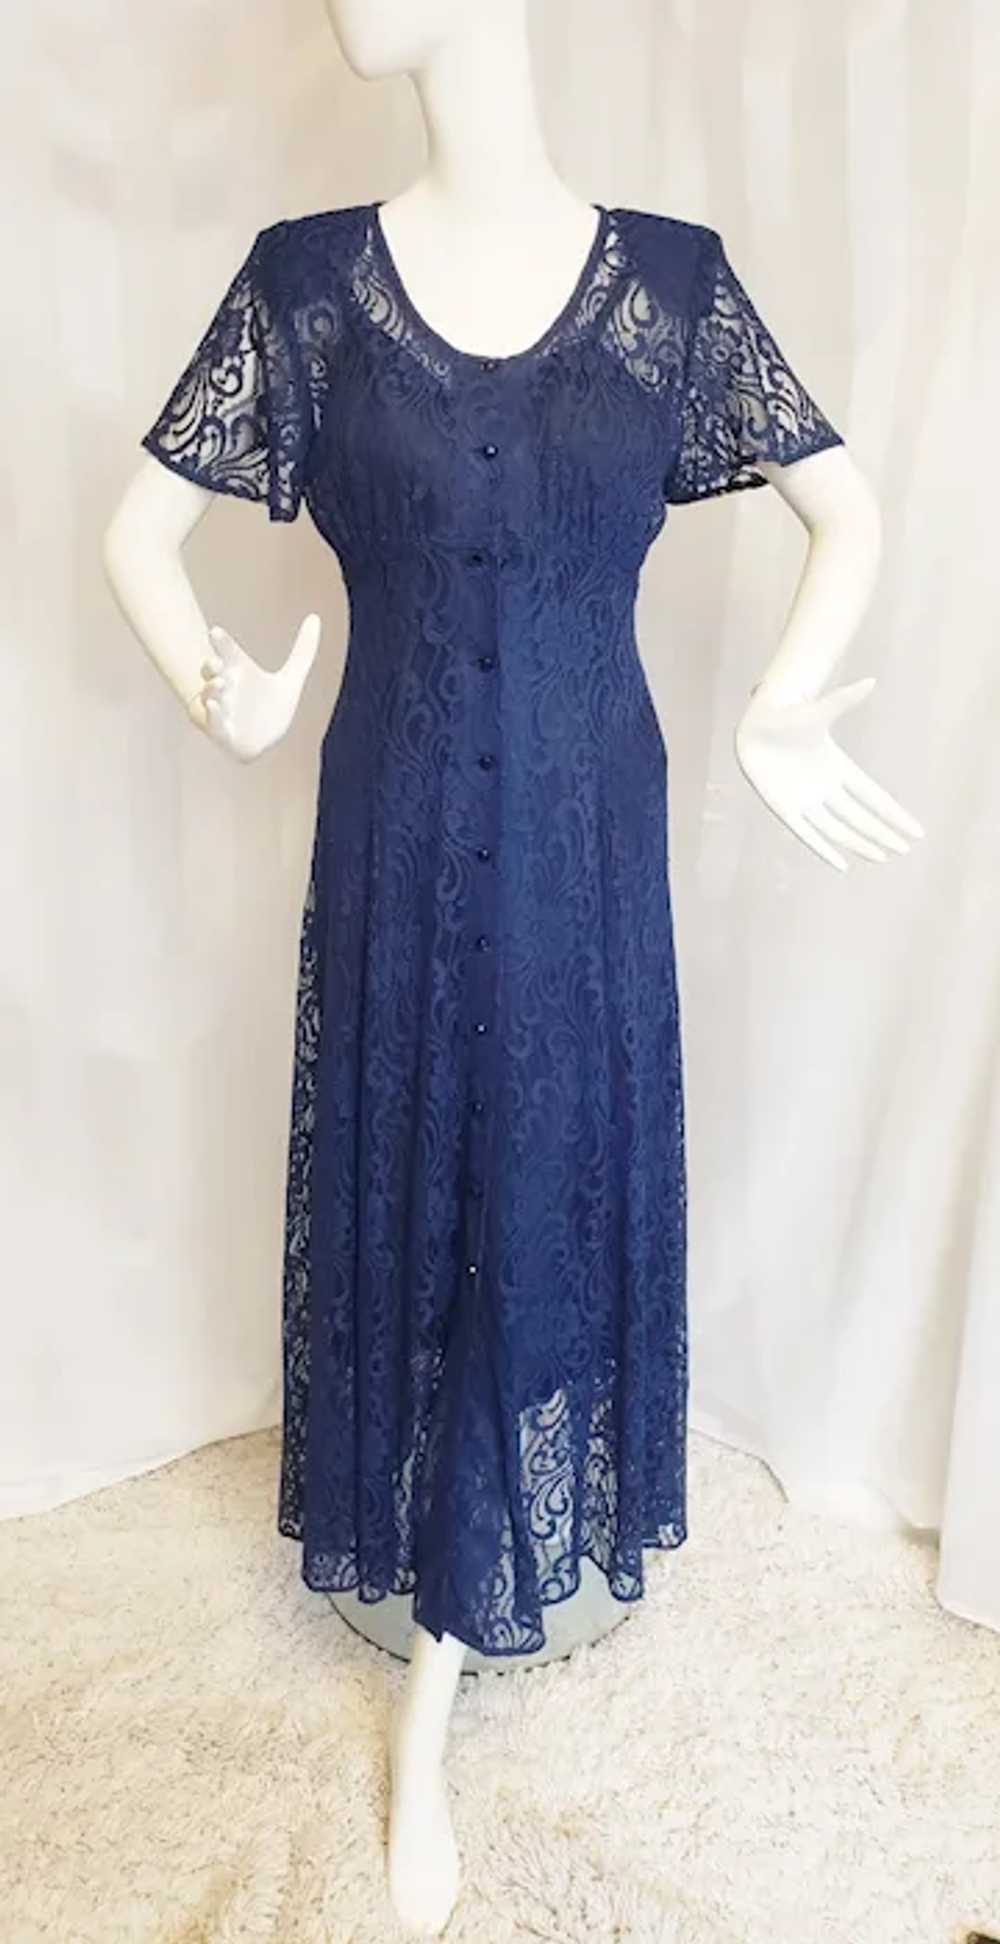 Romantic Lovely Lace Maxi Dress - image 12